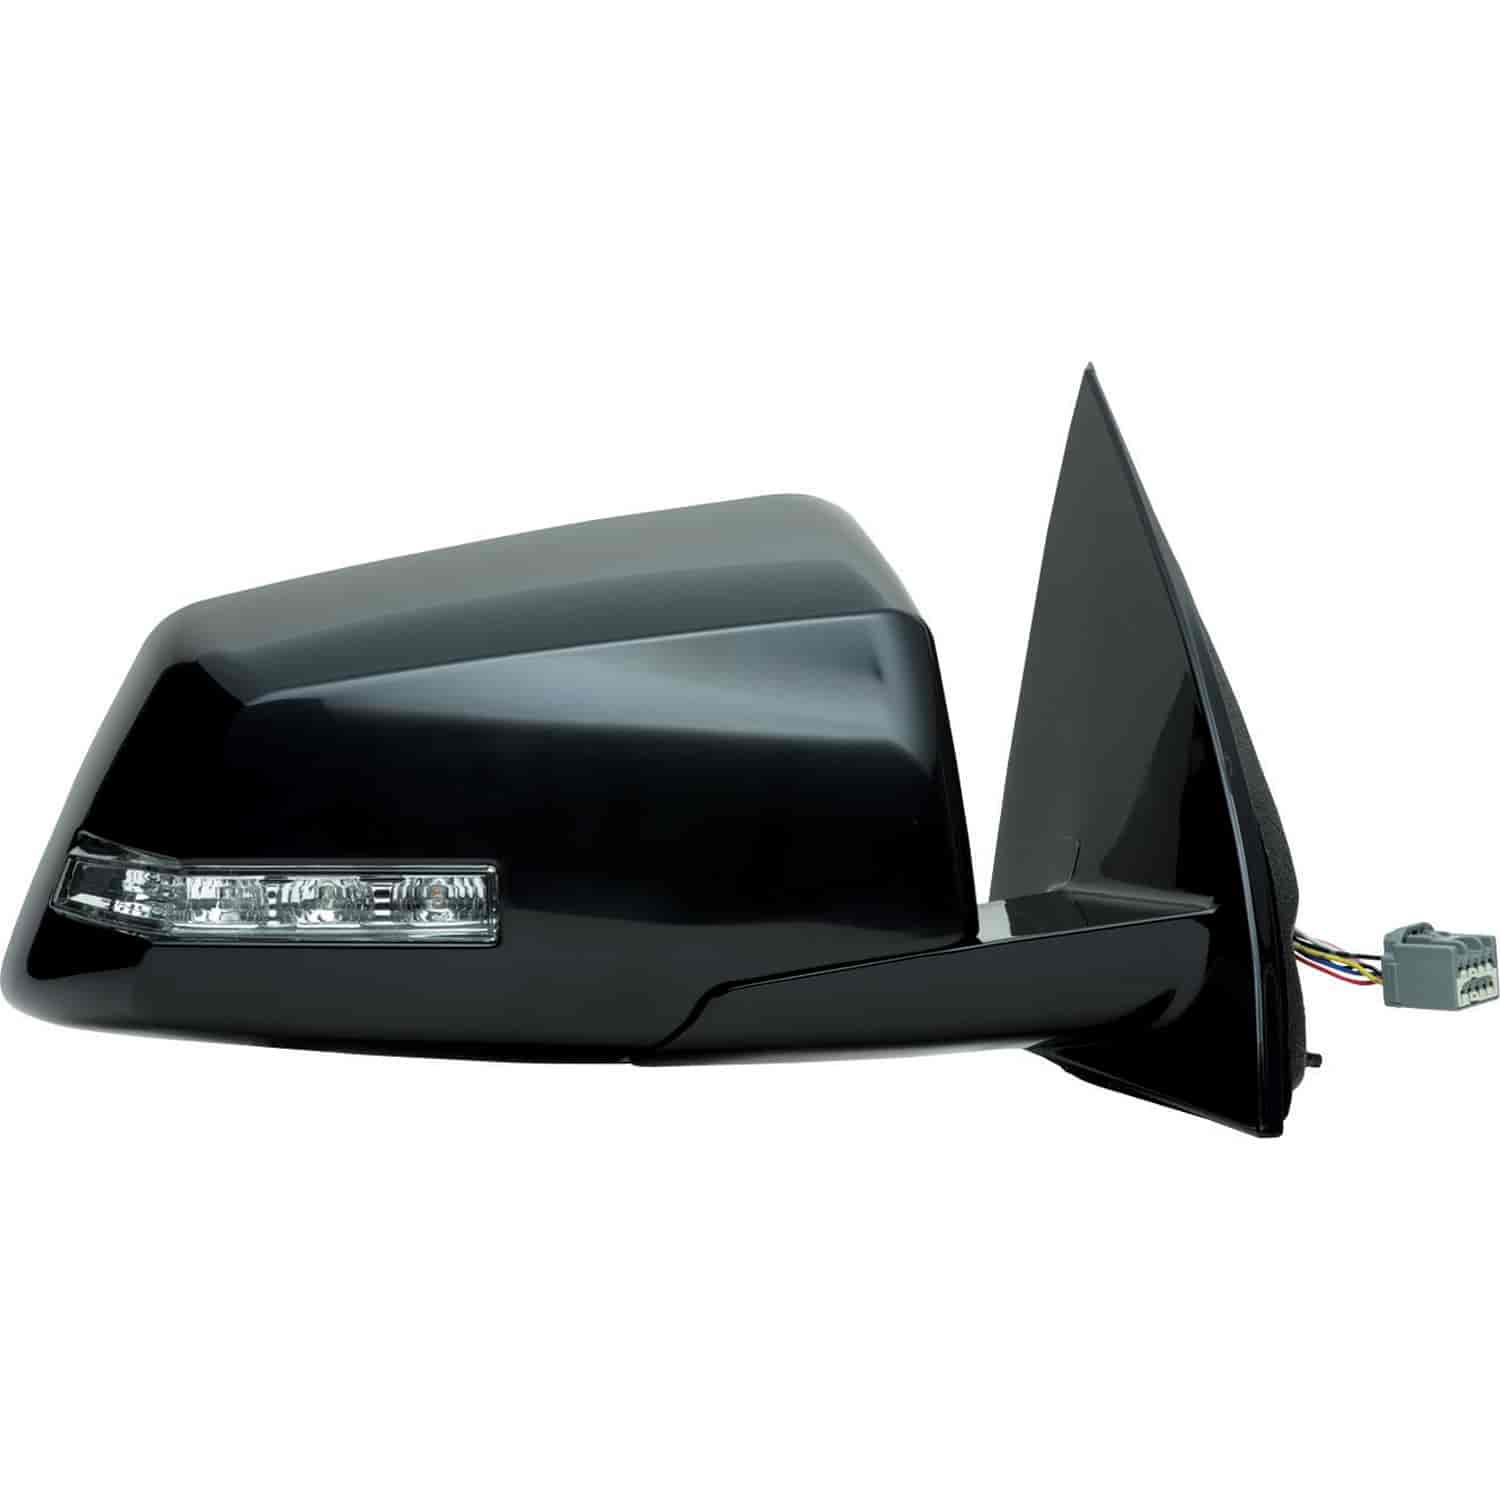 OEM Style Replacement mirror for 09-14 Traverse 07-10 Saturn Outlook 07-14 GMC Acadia passenger side